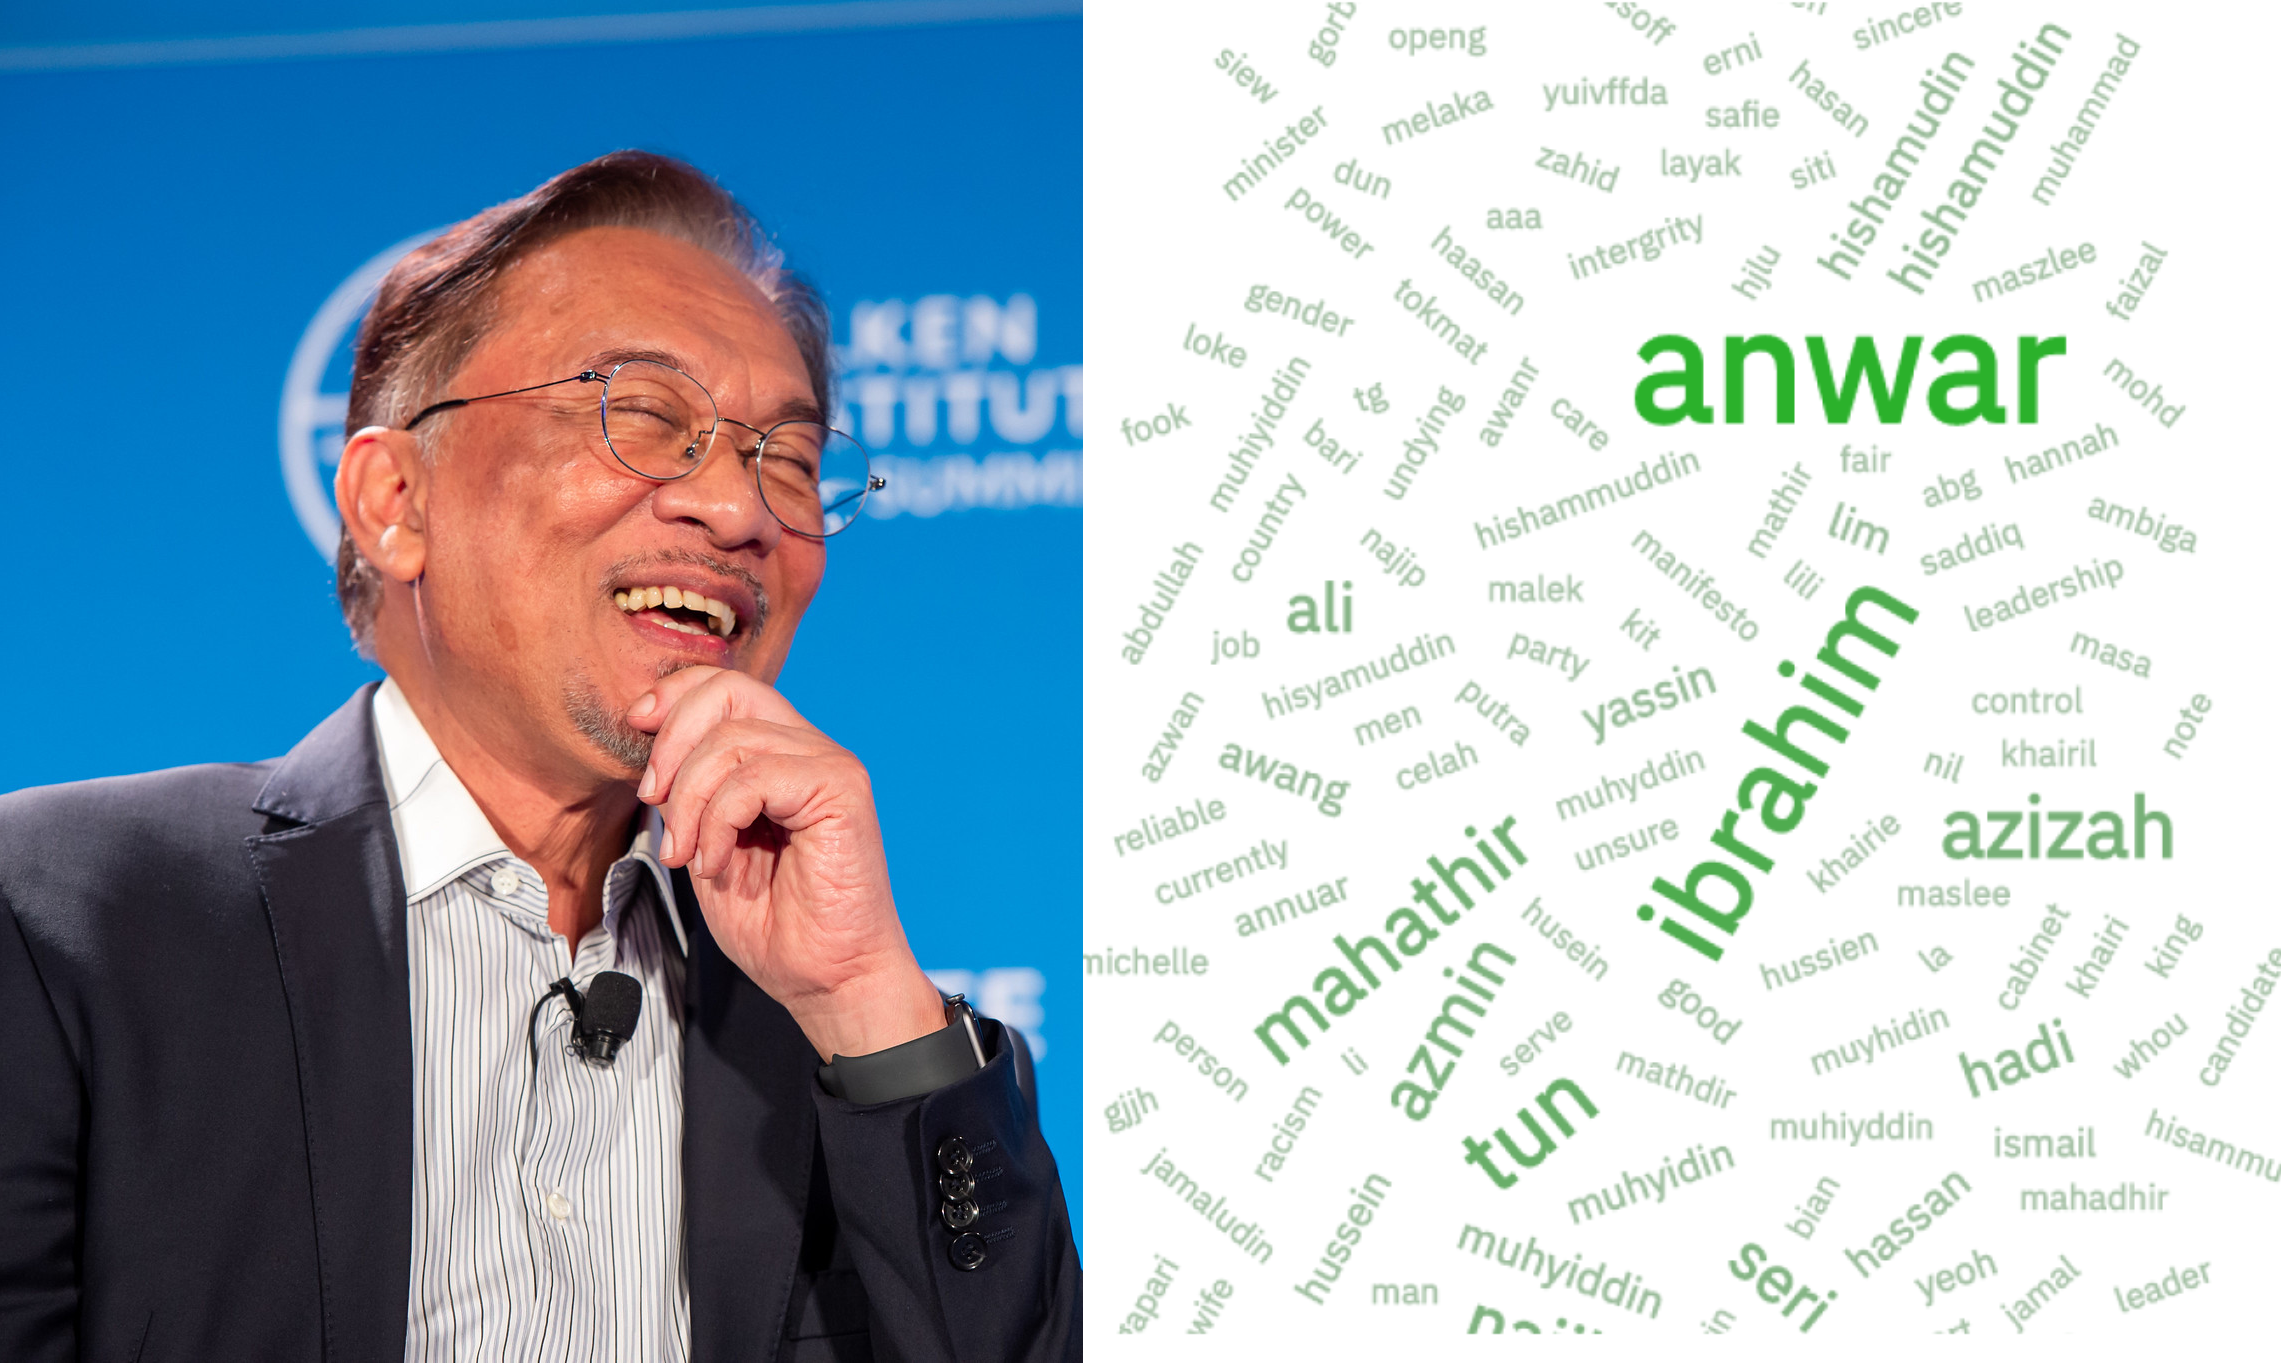 This word cloud shows how much Malaysians want Anwar to be the next PM